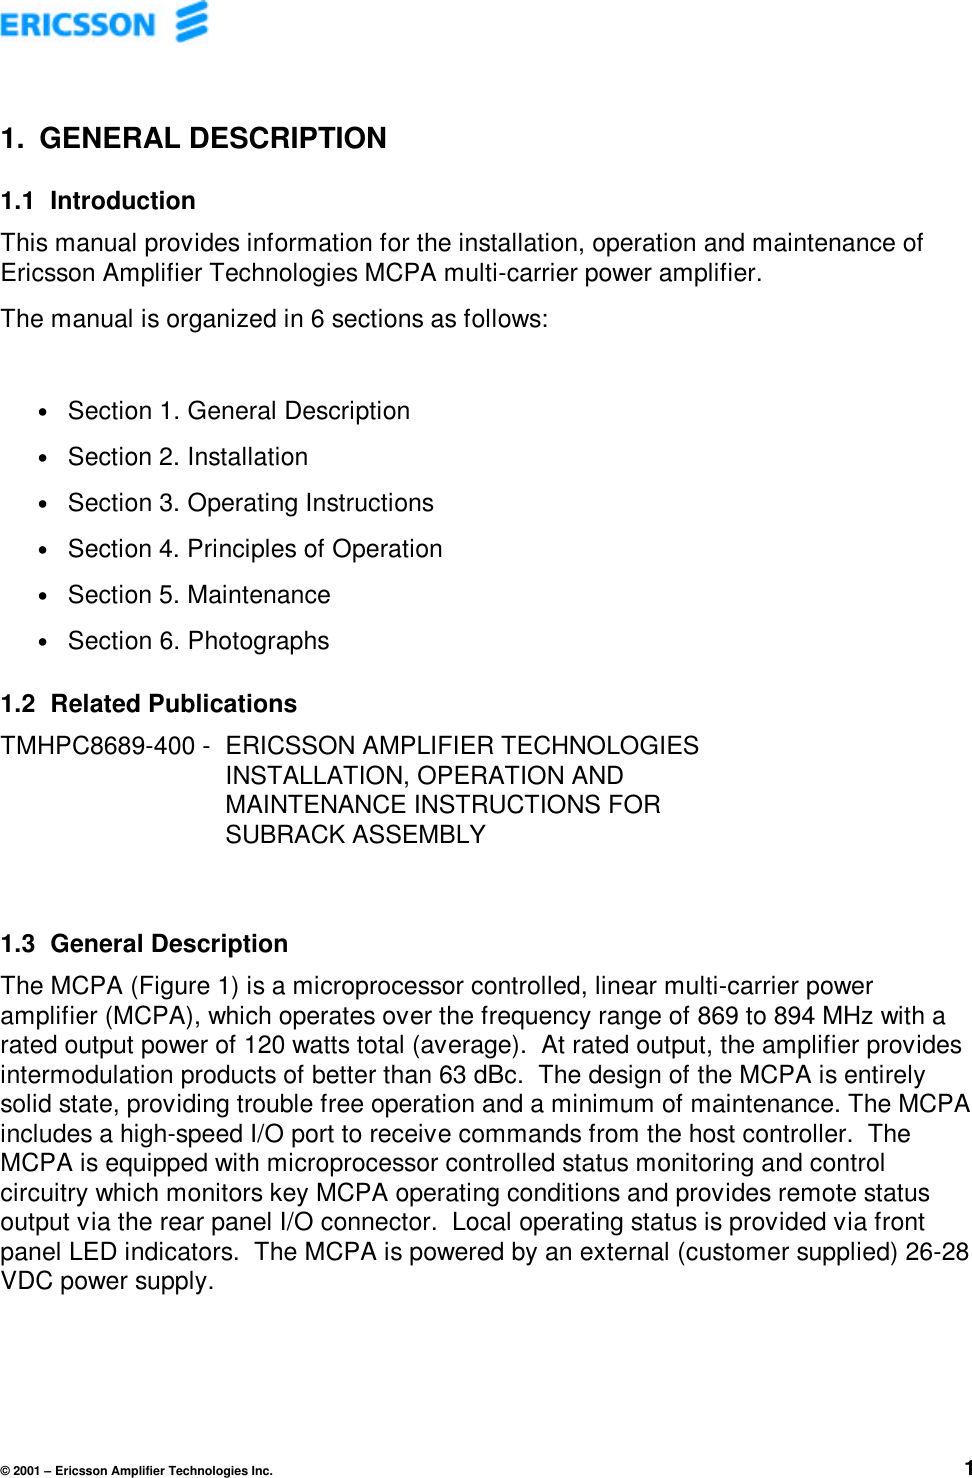 © 2001 – Ericsson Amplifier Technologies Inc. 11. GENERAL DESCRIPTION1.1 IntroductionThis manual provides information for the installation, operation and maintenance ofEricsson Amplifier Technologies MCPA multi-carrier power amplifier.The manual is organized in 6 sections as follows:• Section 1. General Description• Section 2. Installation• Section 3. Operating Instructions• Section 4. Principles of Operation• Section 5. Maintenance• Section 6. Photographs1.2 Related PublicationsTMHPC8689-400 -  ERICSSON AMPLIFIER TECHNOLOGIESINSTALLATION, OPERATION ANDMAINTENANCE INSTRUCTIONS FORSUBRACK ASSEMBLY1.3 General DescriptionThe MCPA (Figure 1) is a microprocessor controlled, linear multi-carrier poweramplifier (MCPA), which operates over the frequency range of 869 to 894 MHz with arated output power of 120 watts total (average).  At rated output, the amplifier providesintermodulation products of better than 63 dBc.  The design of the MCPA is entirelysolid state, providing trouble free operation and a minimum of maintenance. The MCPAincludes a high-speed I/O port to receive commands from the host controller.  TheMCPA is equipped with microprocessor controlled status monitoring and controlcircuitry which monitors key MCPA operating conditions and provides remote statusoutput via the rear panel I/O connector.  Local operating status is provided via frontpanel LED indicators.  The MCPA is powered by an external (customer supplied) 26-28VDC power supply.